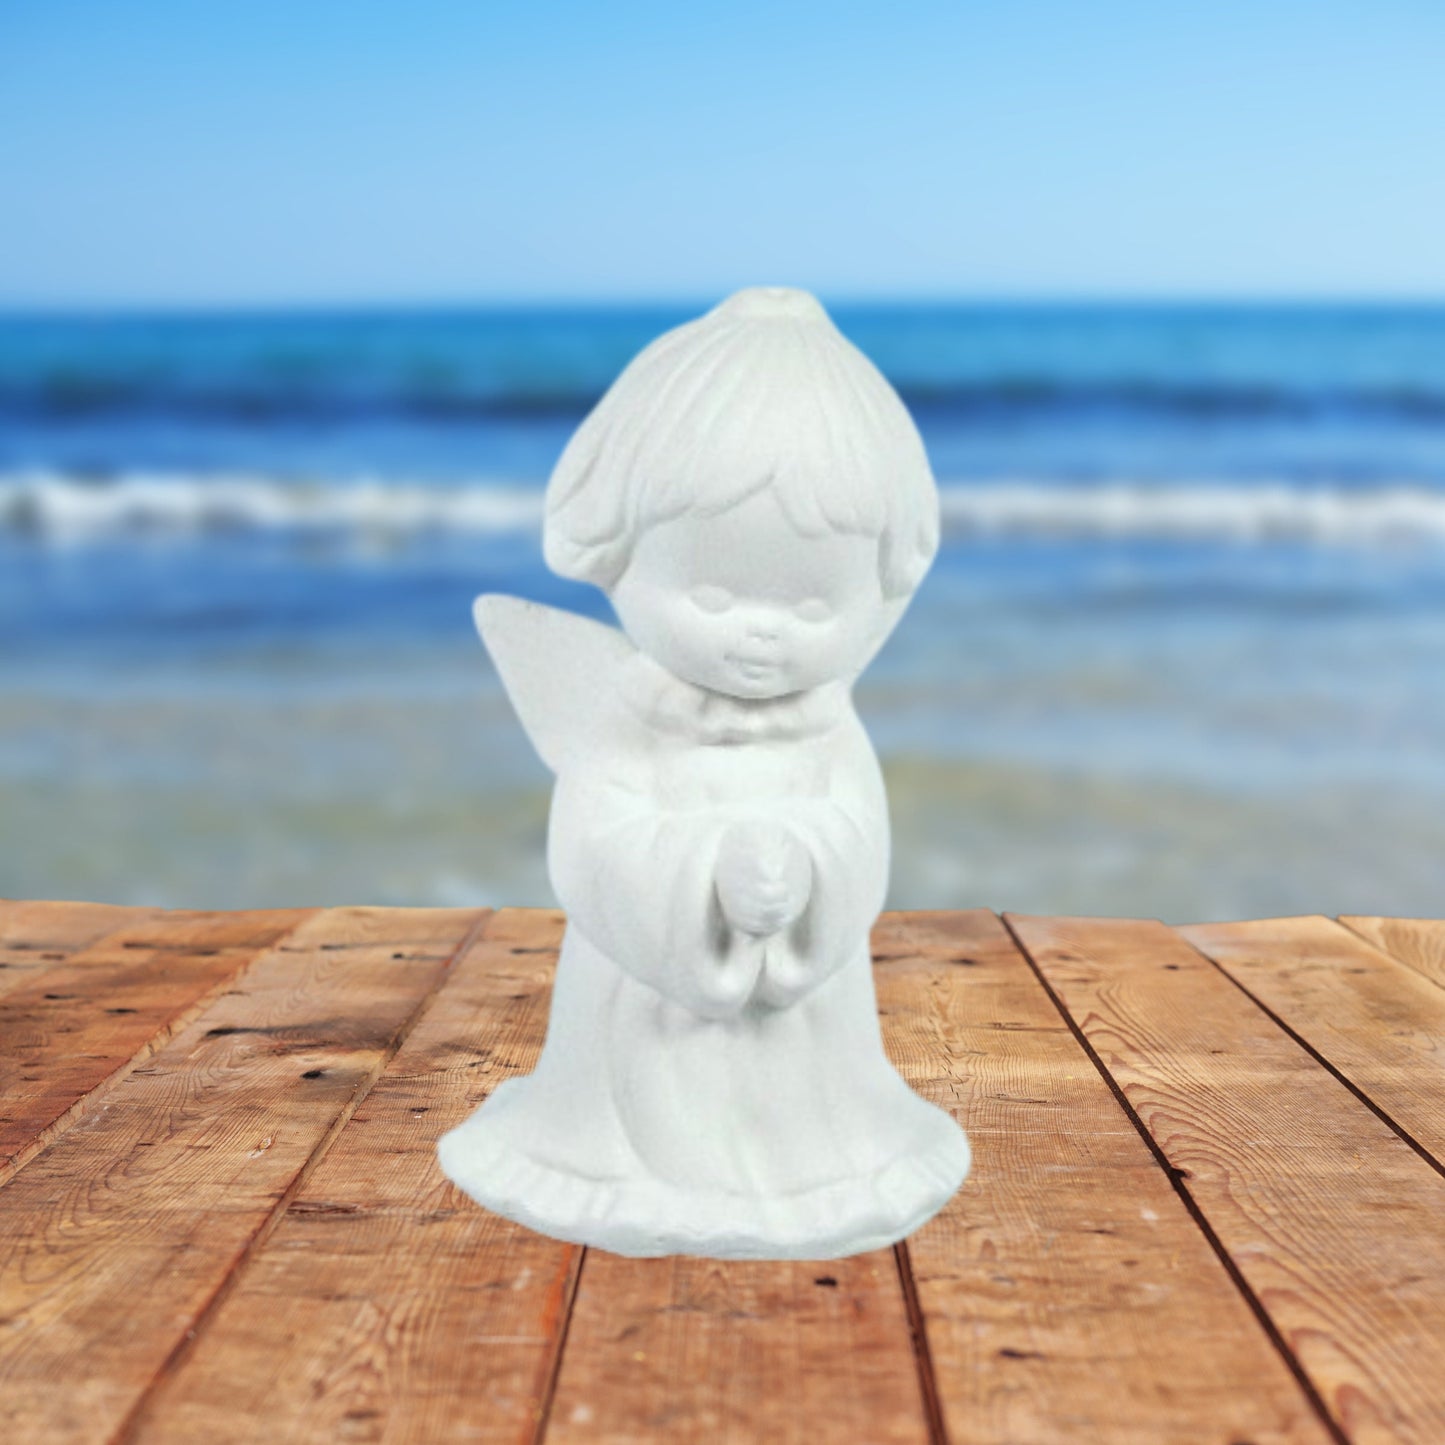 Unpainted Ceramic Angel Figurine / Angel Gift / Angel Statue / Paint it Yourself / Ready to Paint / Ceramics to Paint / Angel Decor / Bisque